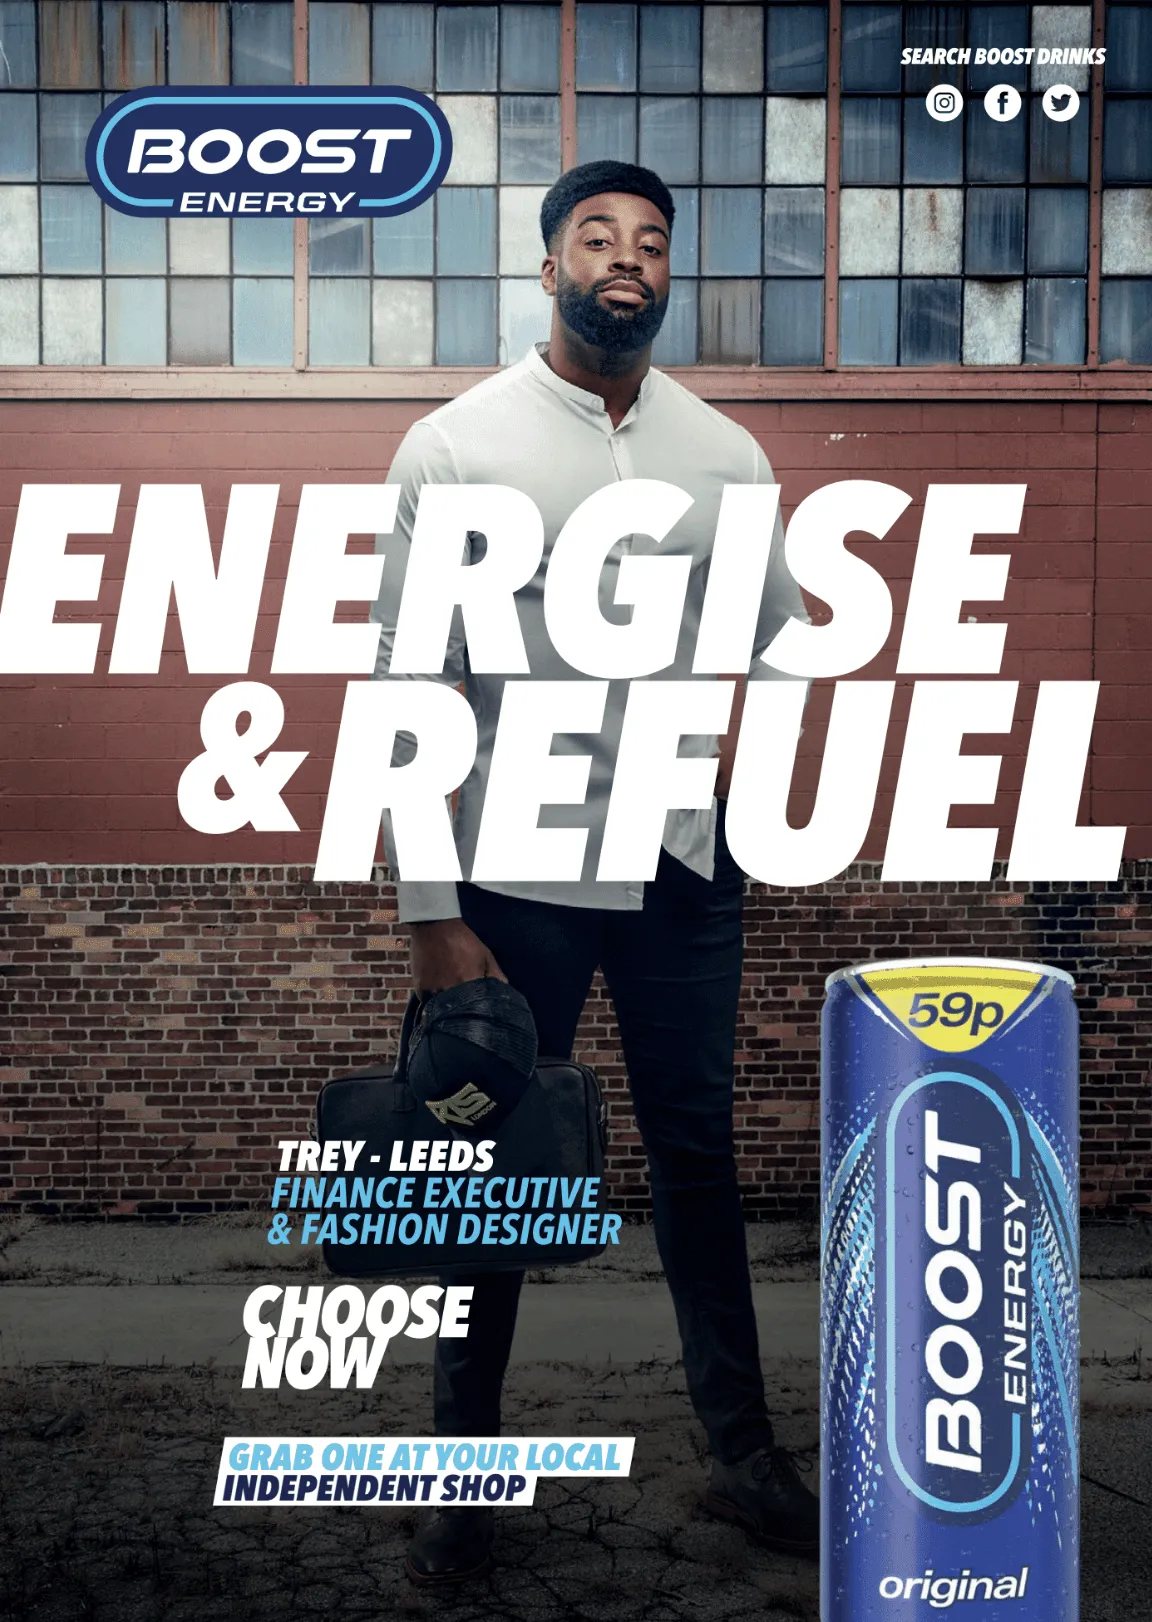 A man is standing next to a can of boost energy drink.